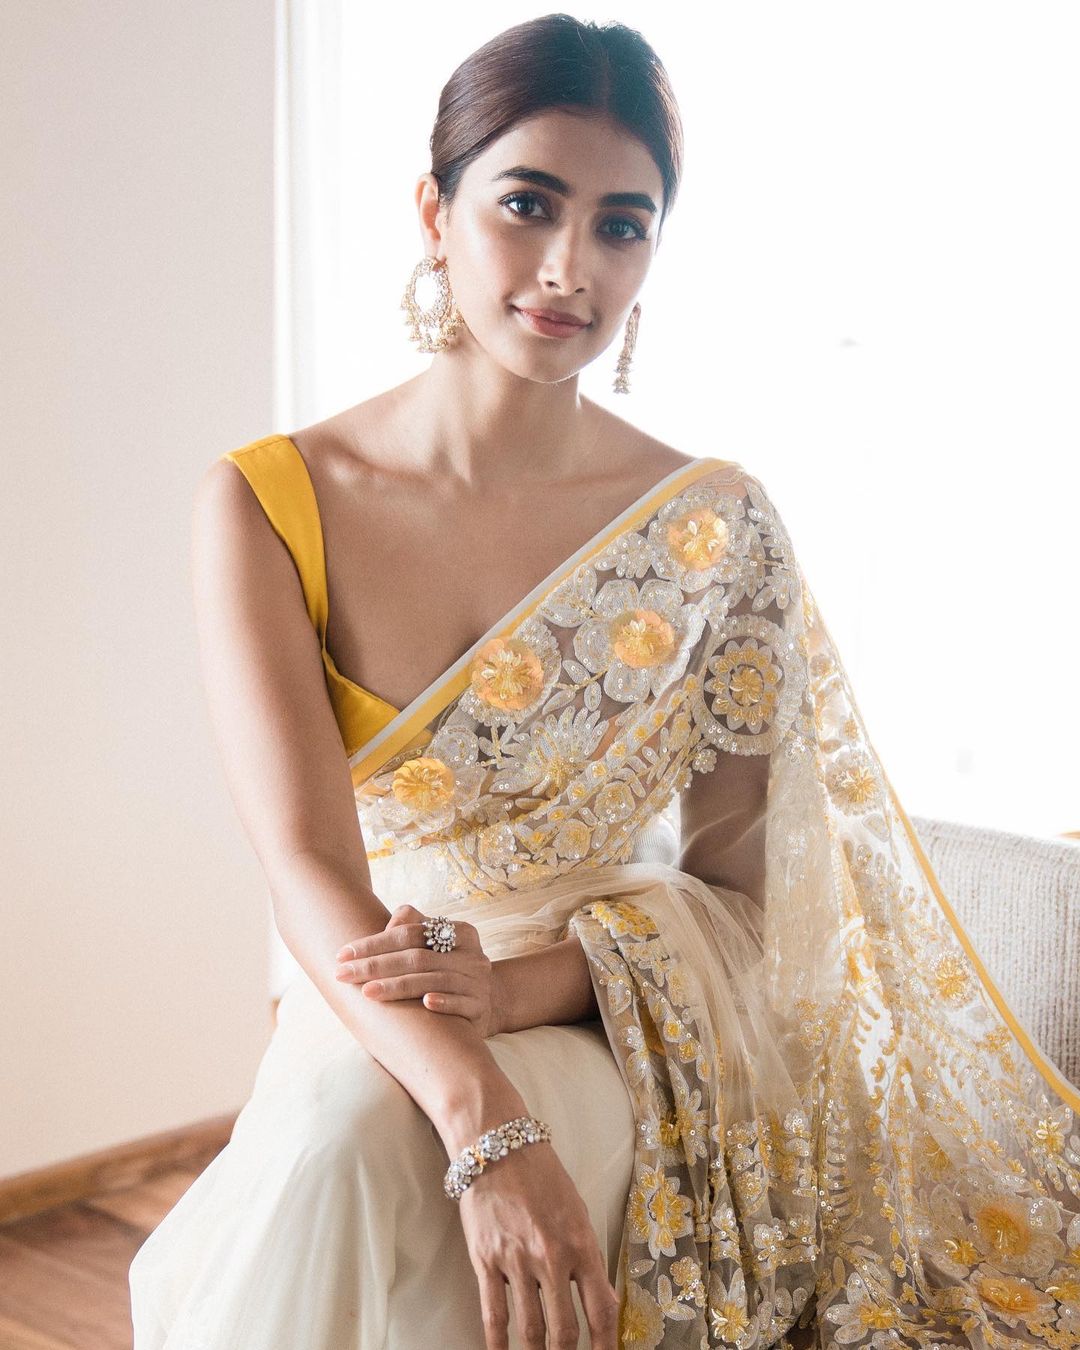 Pooja Hegde looks pretty in the floral embellished saree